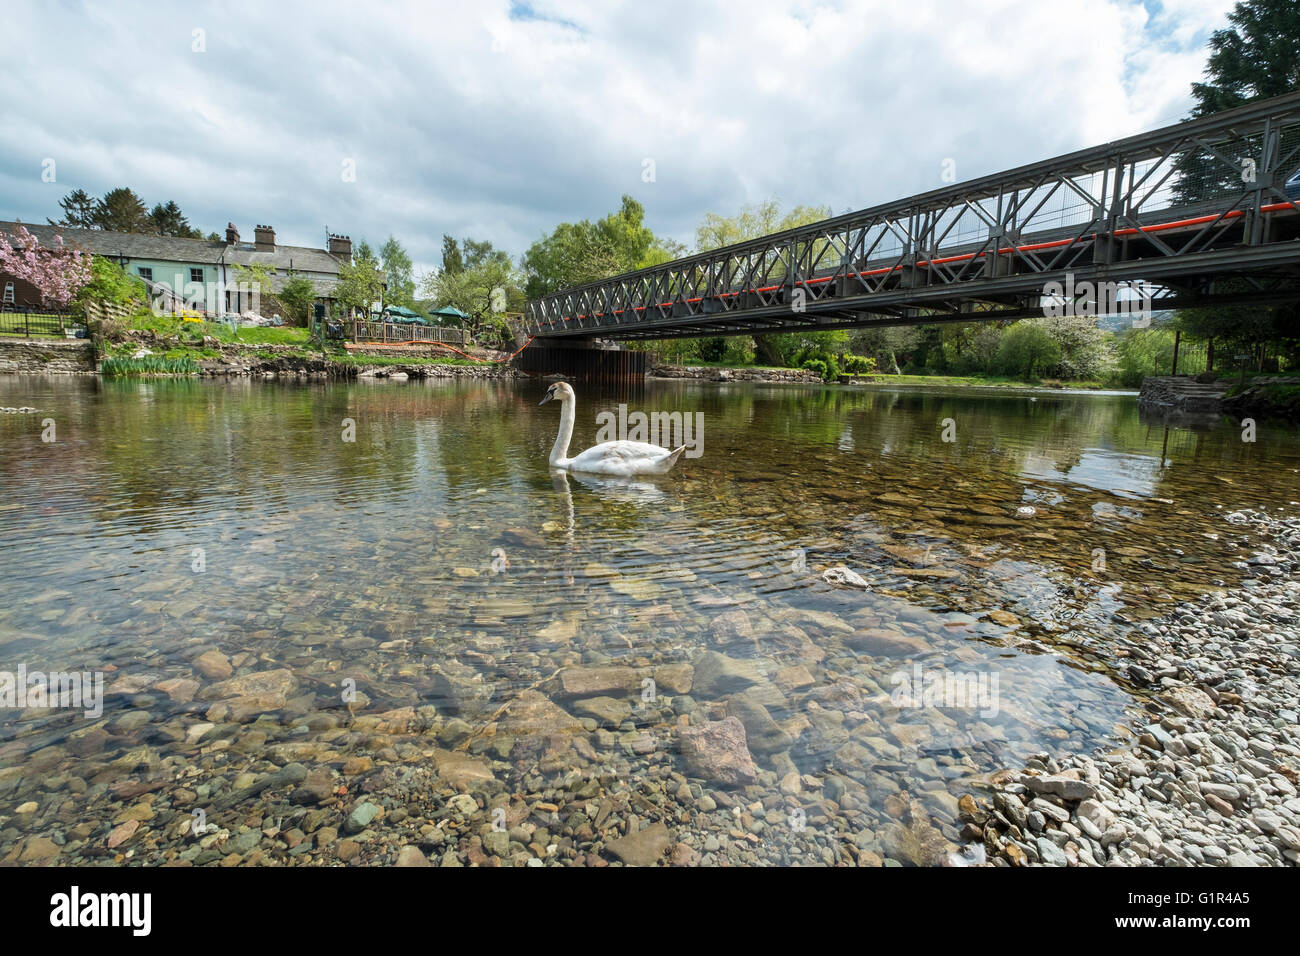 The new Pooley Bridge has replaced the old stone bridge which was washed away in the floods of 2015. Stock Photo